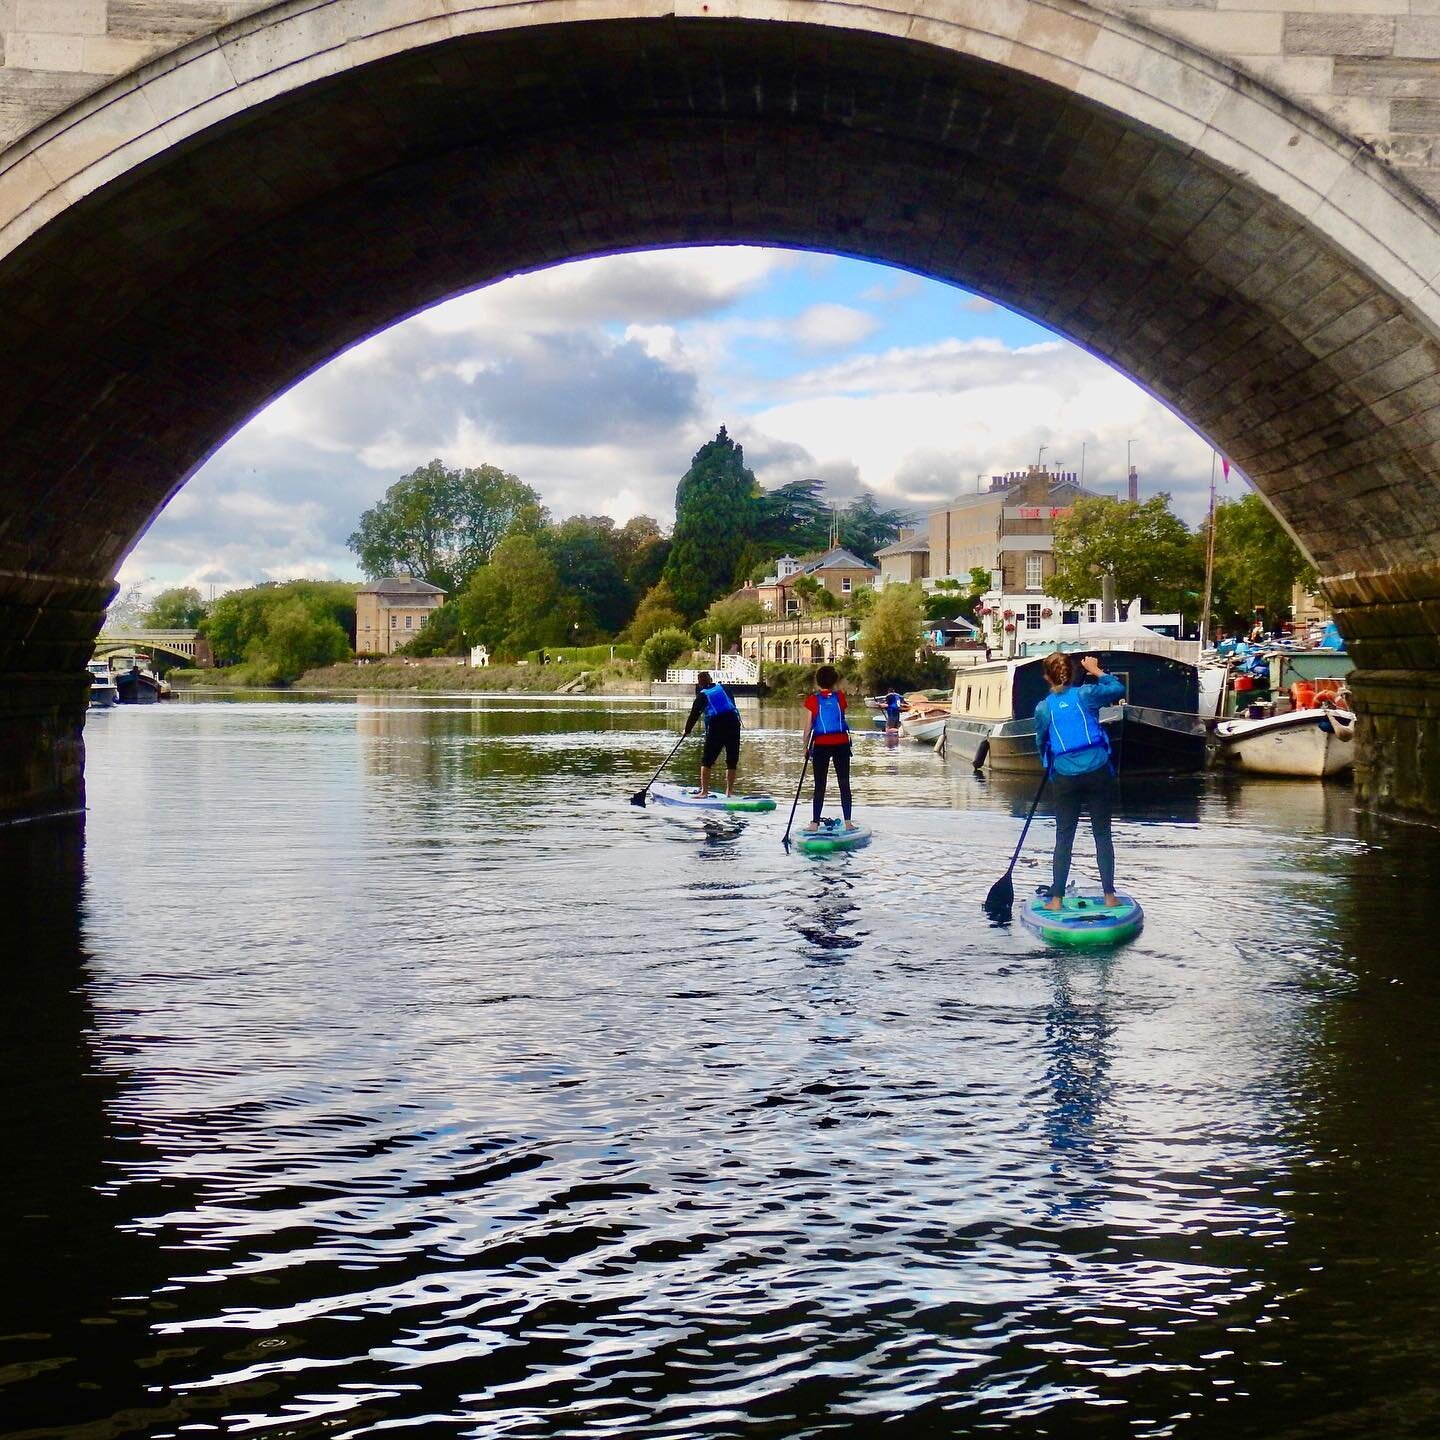 Summer in #RichmondUponThames you have to ❤️ it!

It&rsquo;s been a great summer for Paddleboarding on the #RiverThames. If you haven&rsquo;t already, now is a great time to #JoinUsOnTheWater

🏄&zwj;♀️🏄&zwj;♂️😎☀️🤙🏽

#SummerInLondon
#IndianSummer